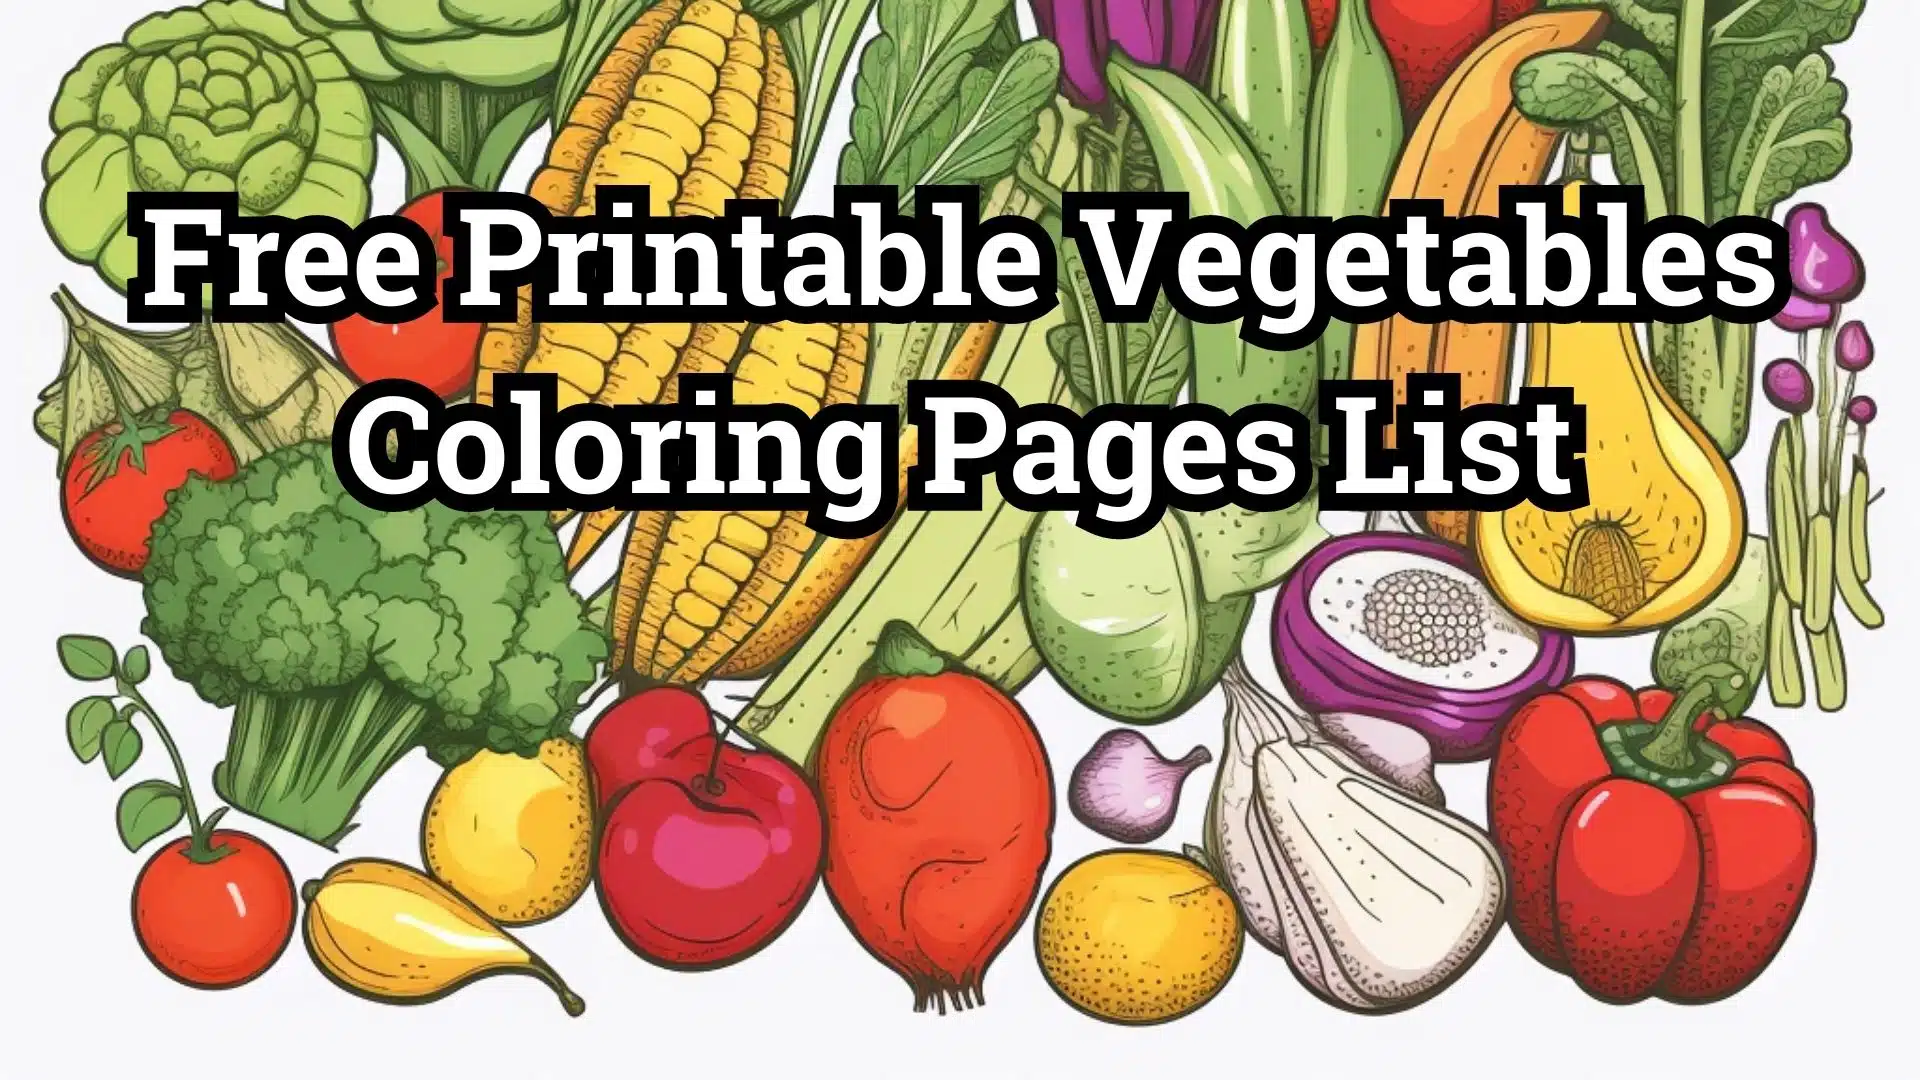 Free Printable Vegetables Coloring Pages List